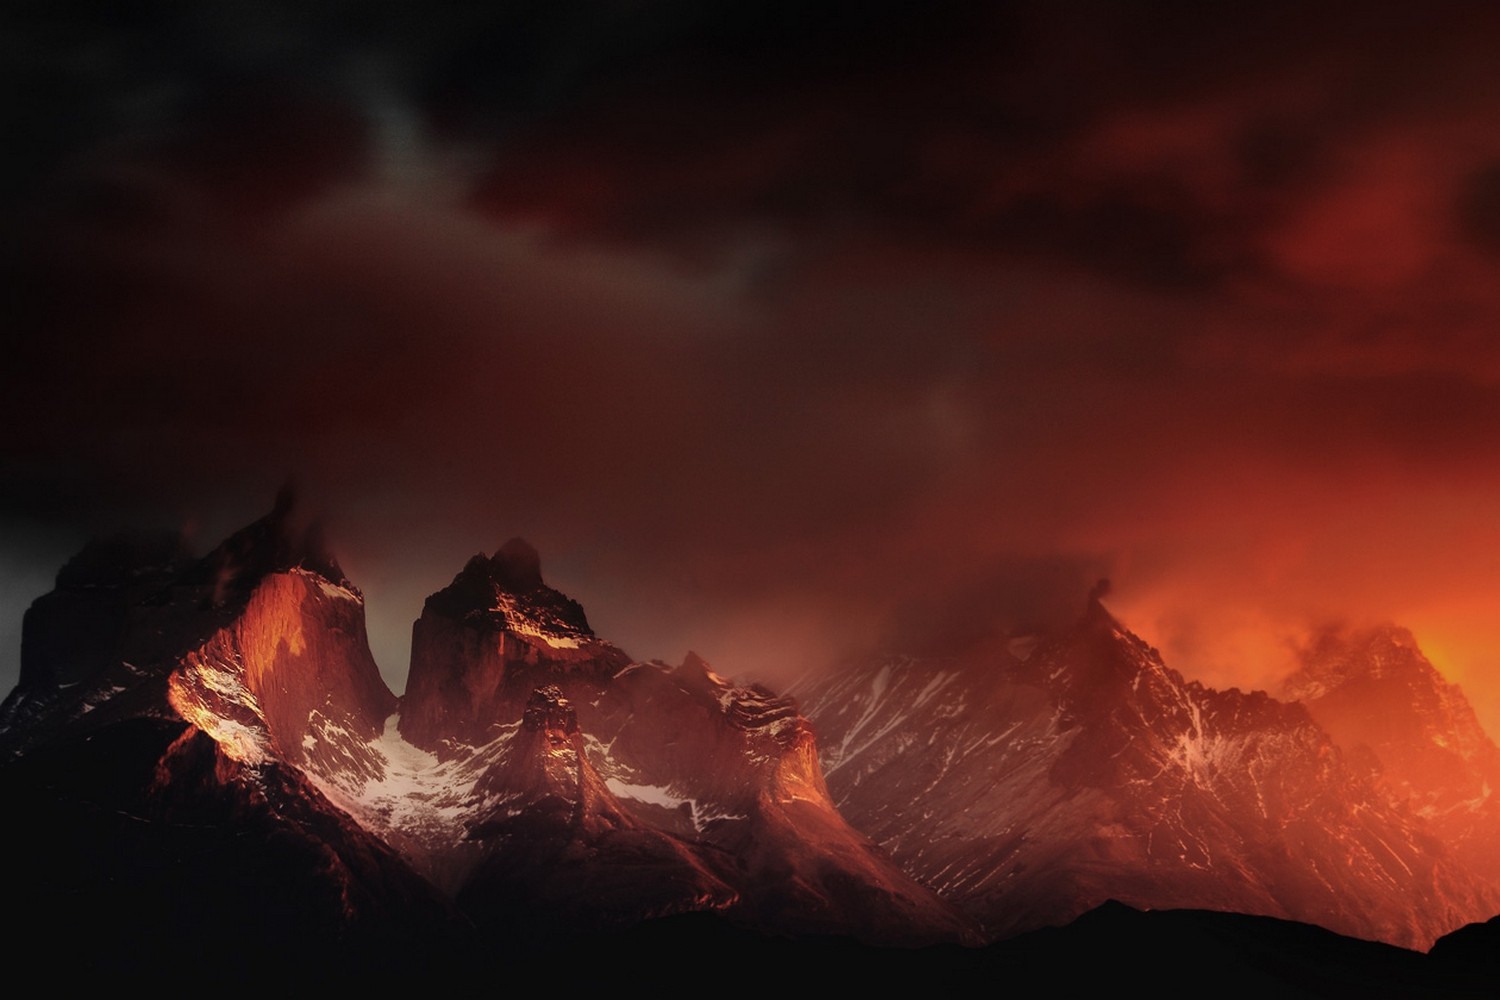 Torres Del Paine Chile Mountains Clouds Red Orange Snowy Peak Patagonia Nature Landscape 1500x1000